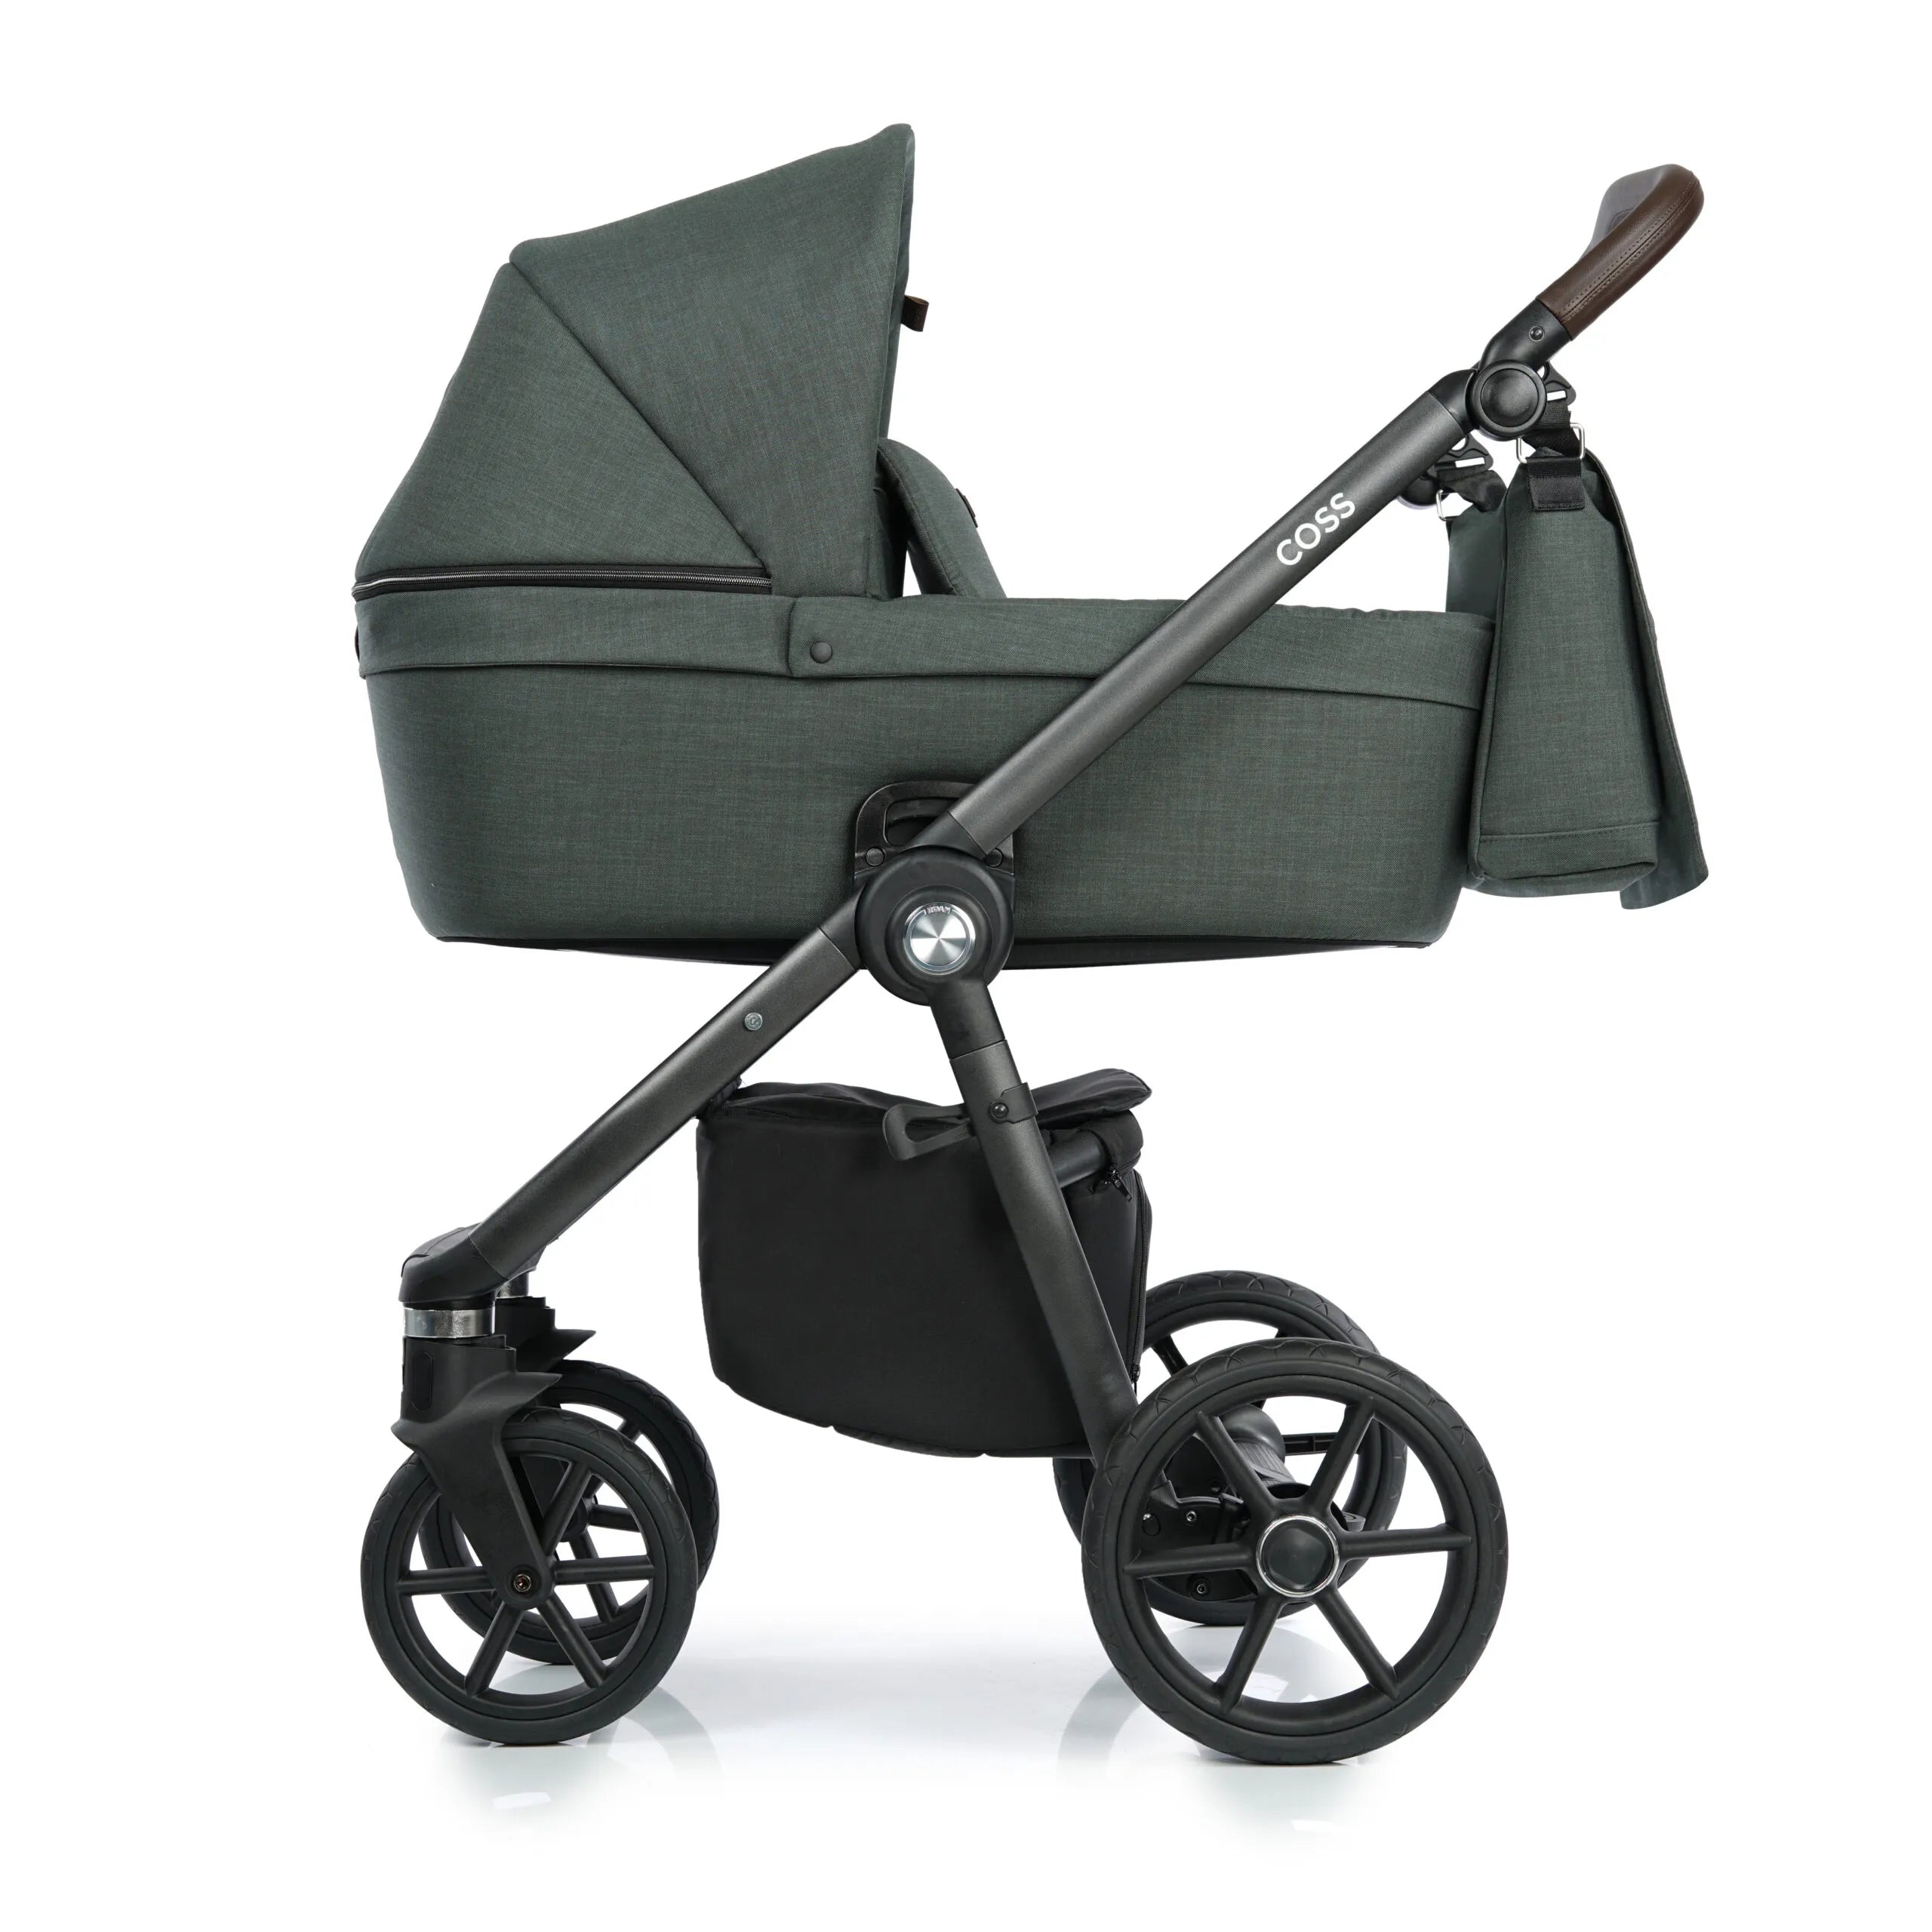 Roan COSS baby stroller carry cot and stroller, color Night Green